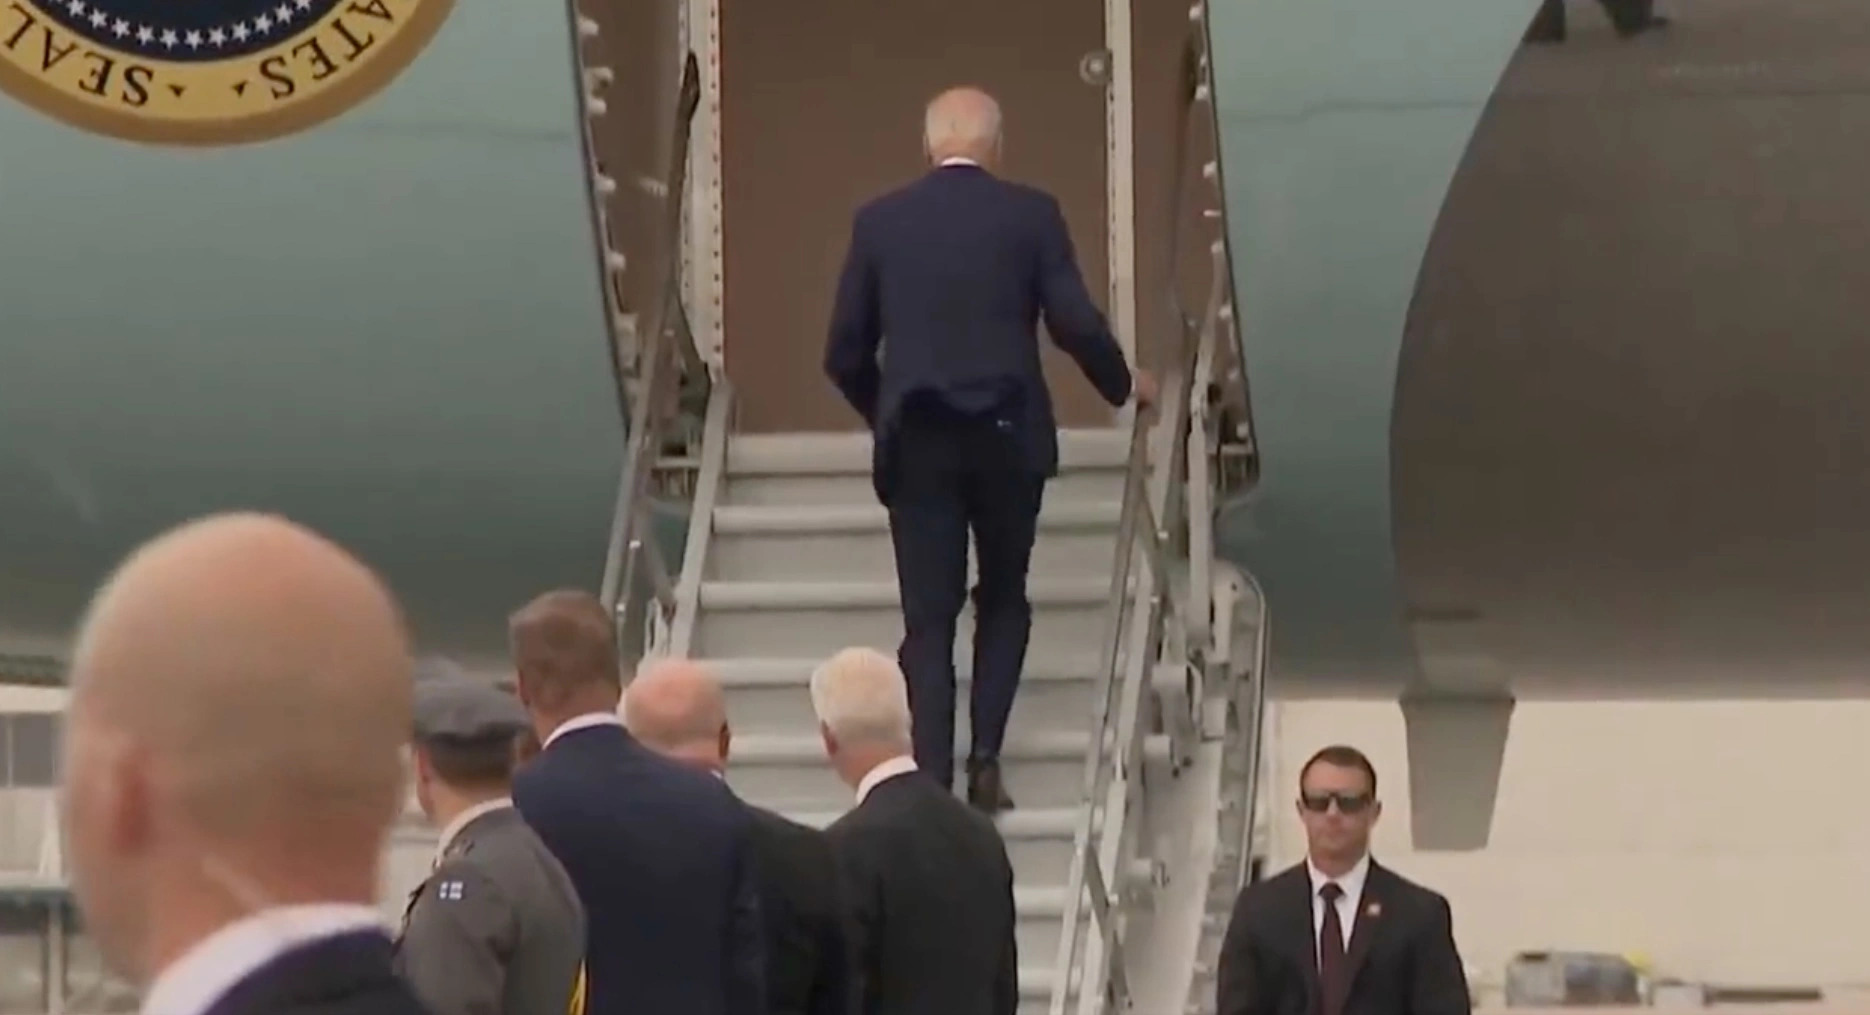 Video: President Biden Experiences Another Stumble Boarding Air Force One, This Time on Shorter Staircase